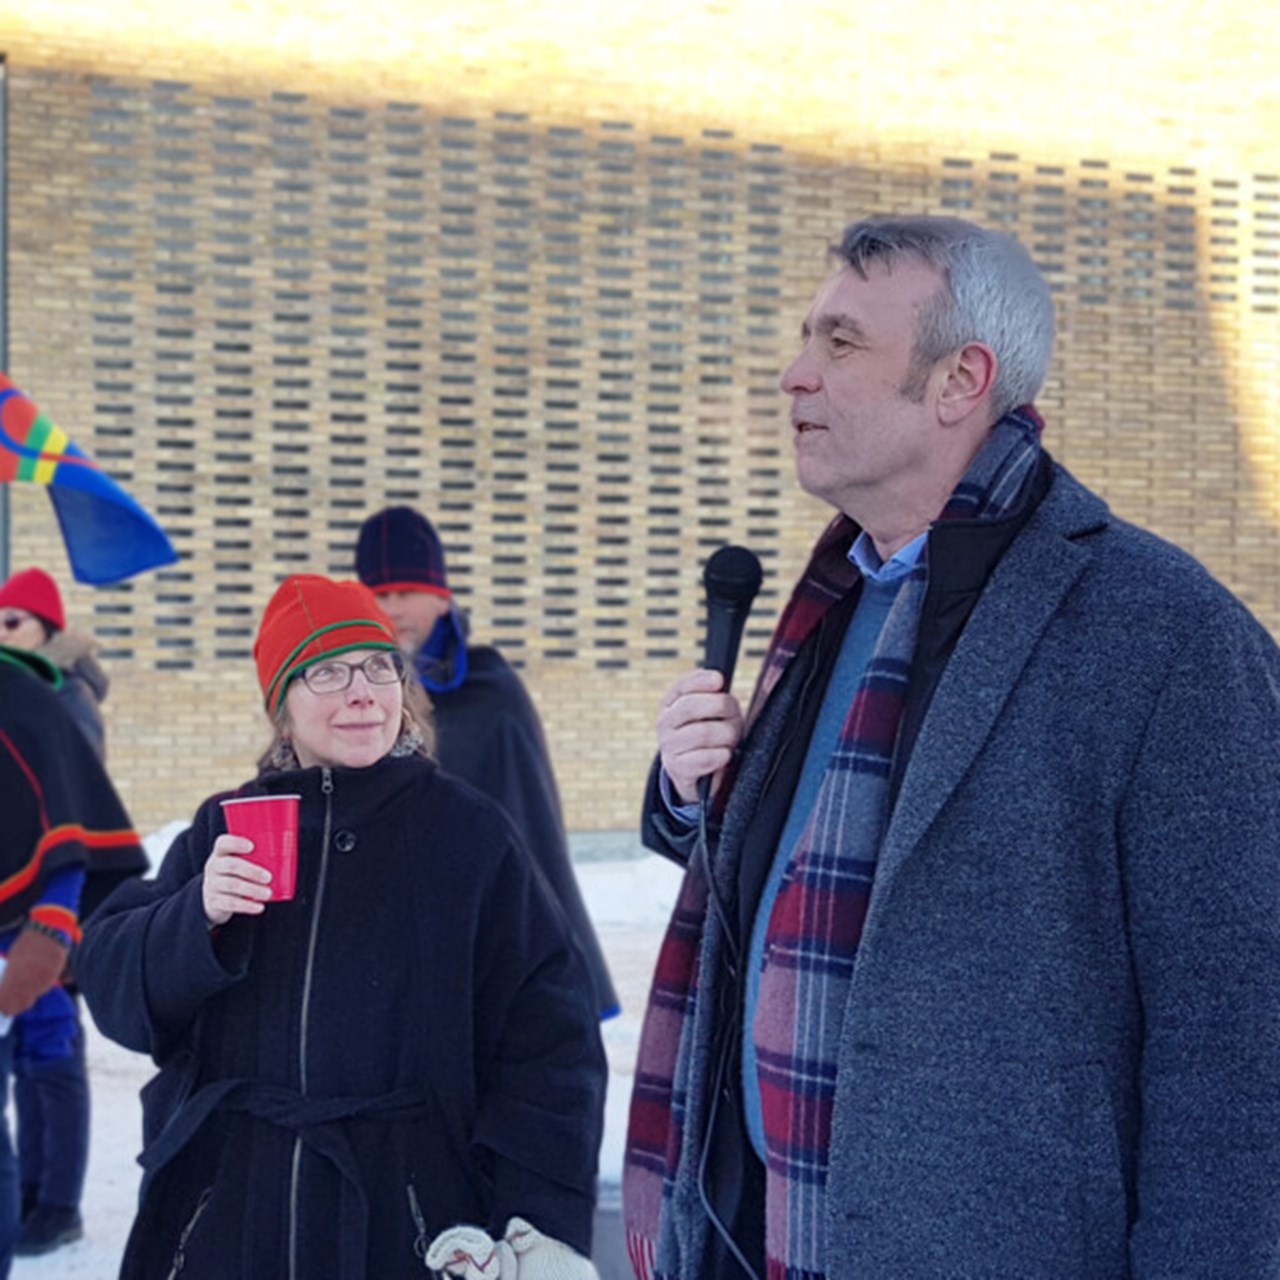 Peter Sköld and Lena Maria Nilsson at the celebration of the Sami National Day at Umeå University last year